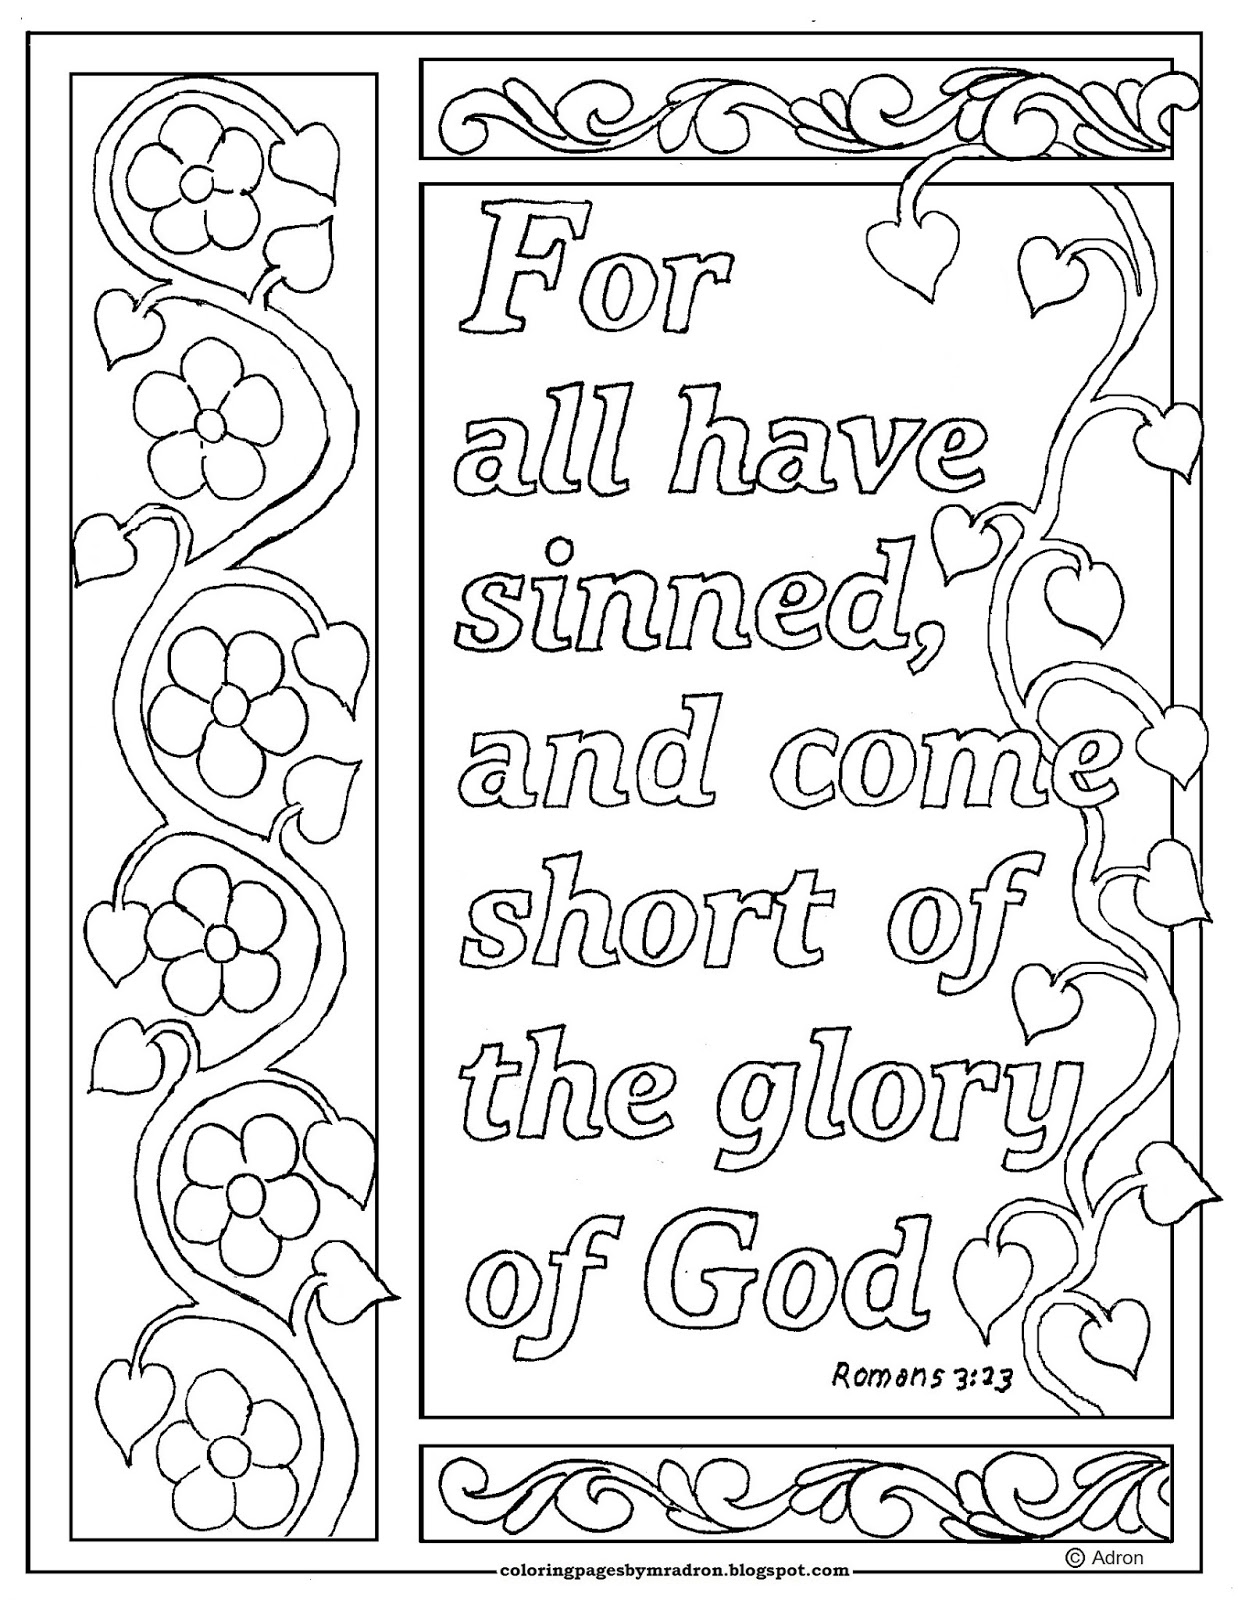 All Have Sinned Coloring Page - boringpop.com